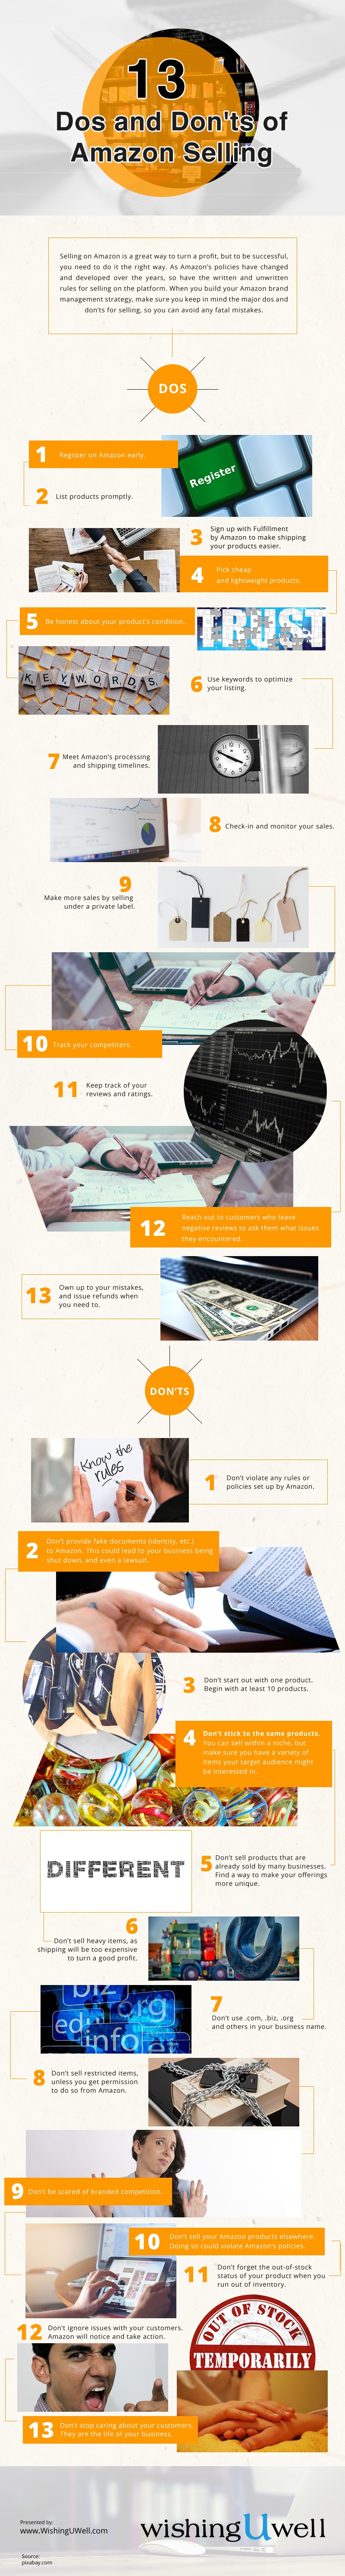 Dos-and-Don'ts-of-Amazon-Selling Infographic